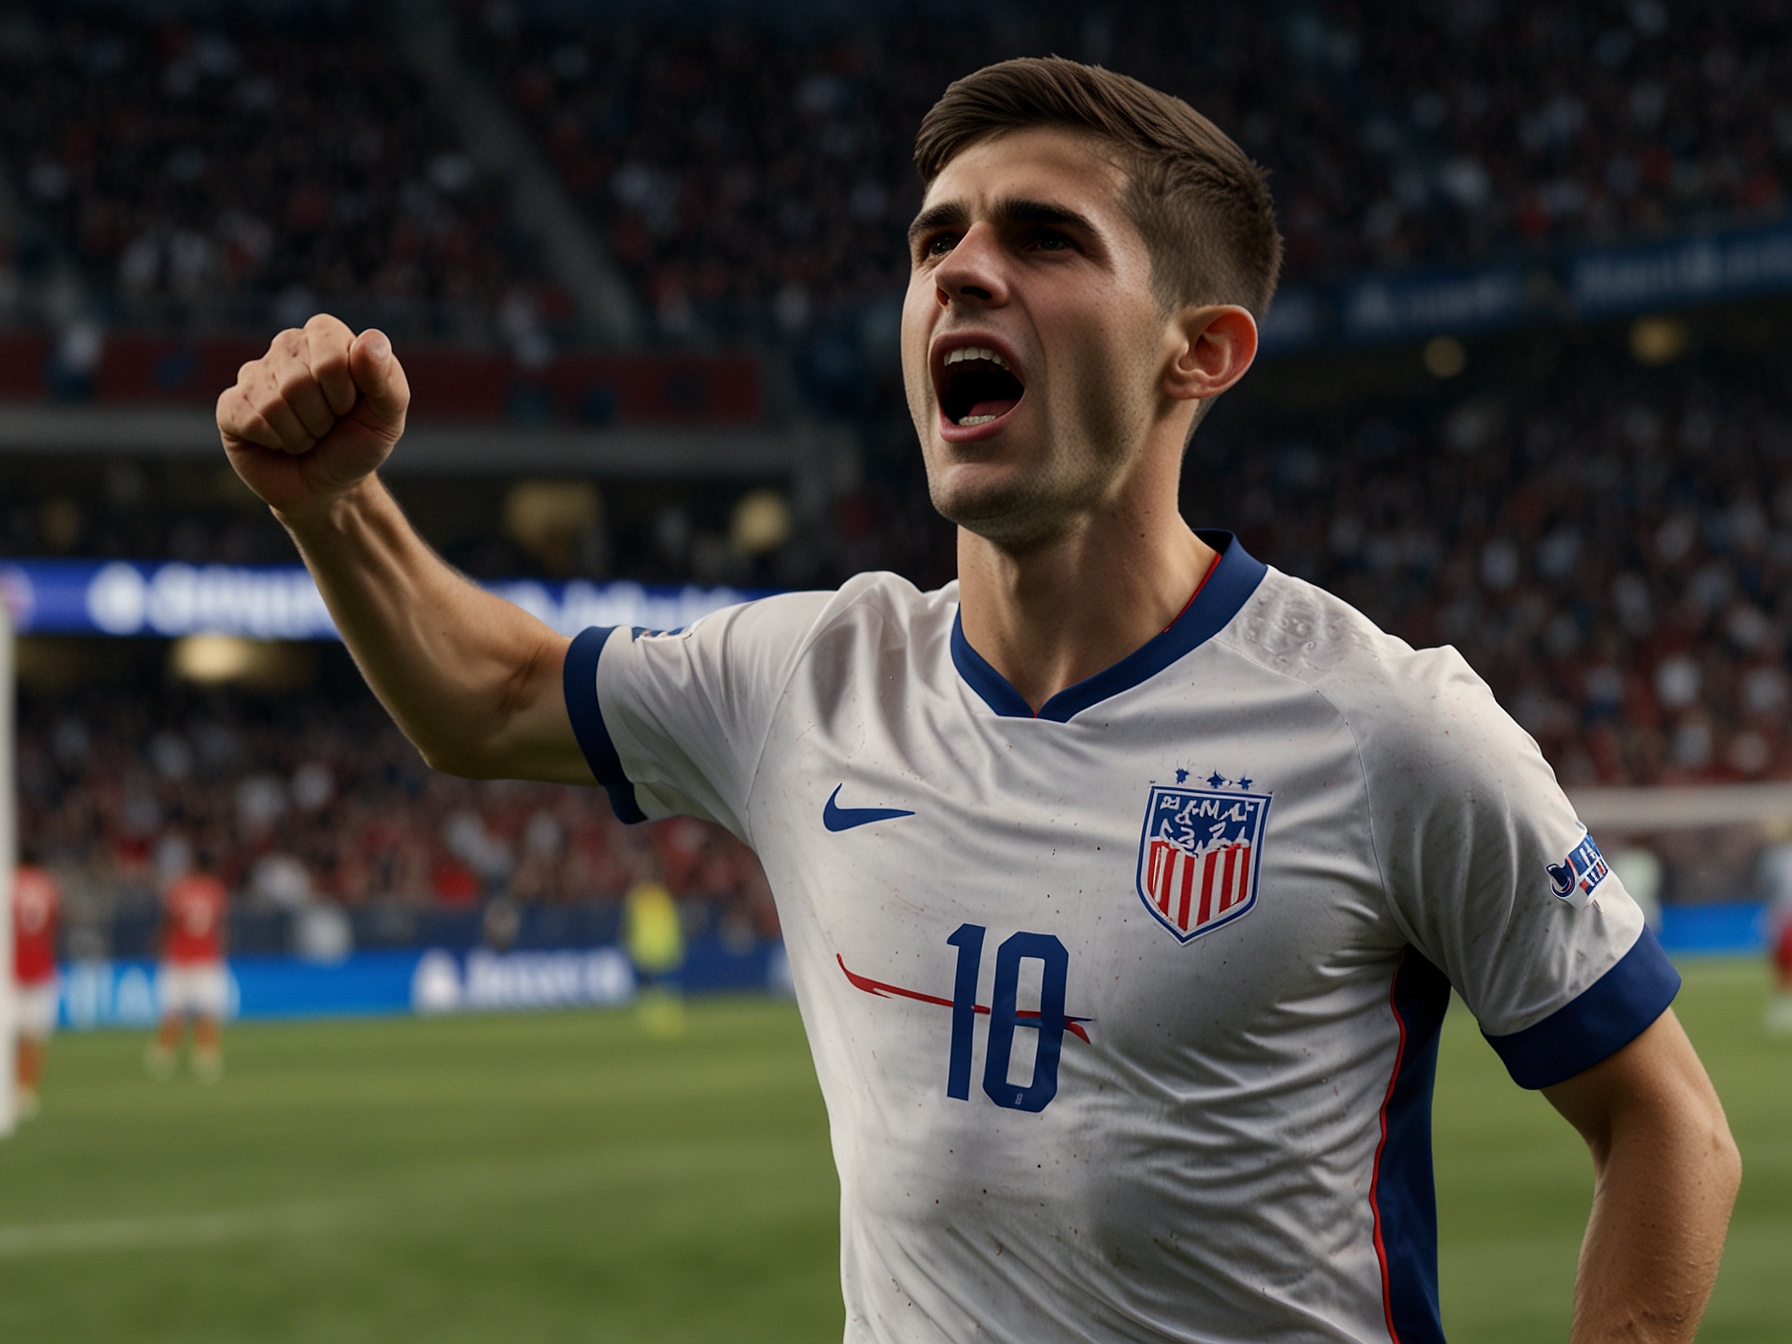 Christian Pulisic celebrates after scoring an equalizing goal against Panama. The image captures a brief moment of hope and determination for the USMNT in a critical Copa America fixture.